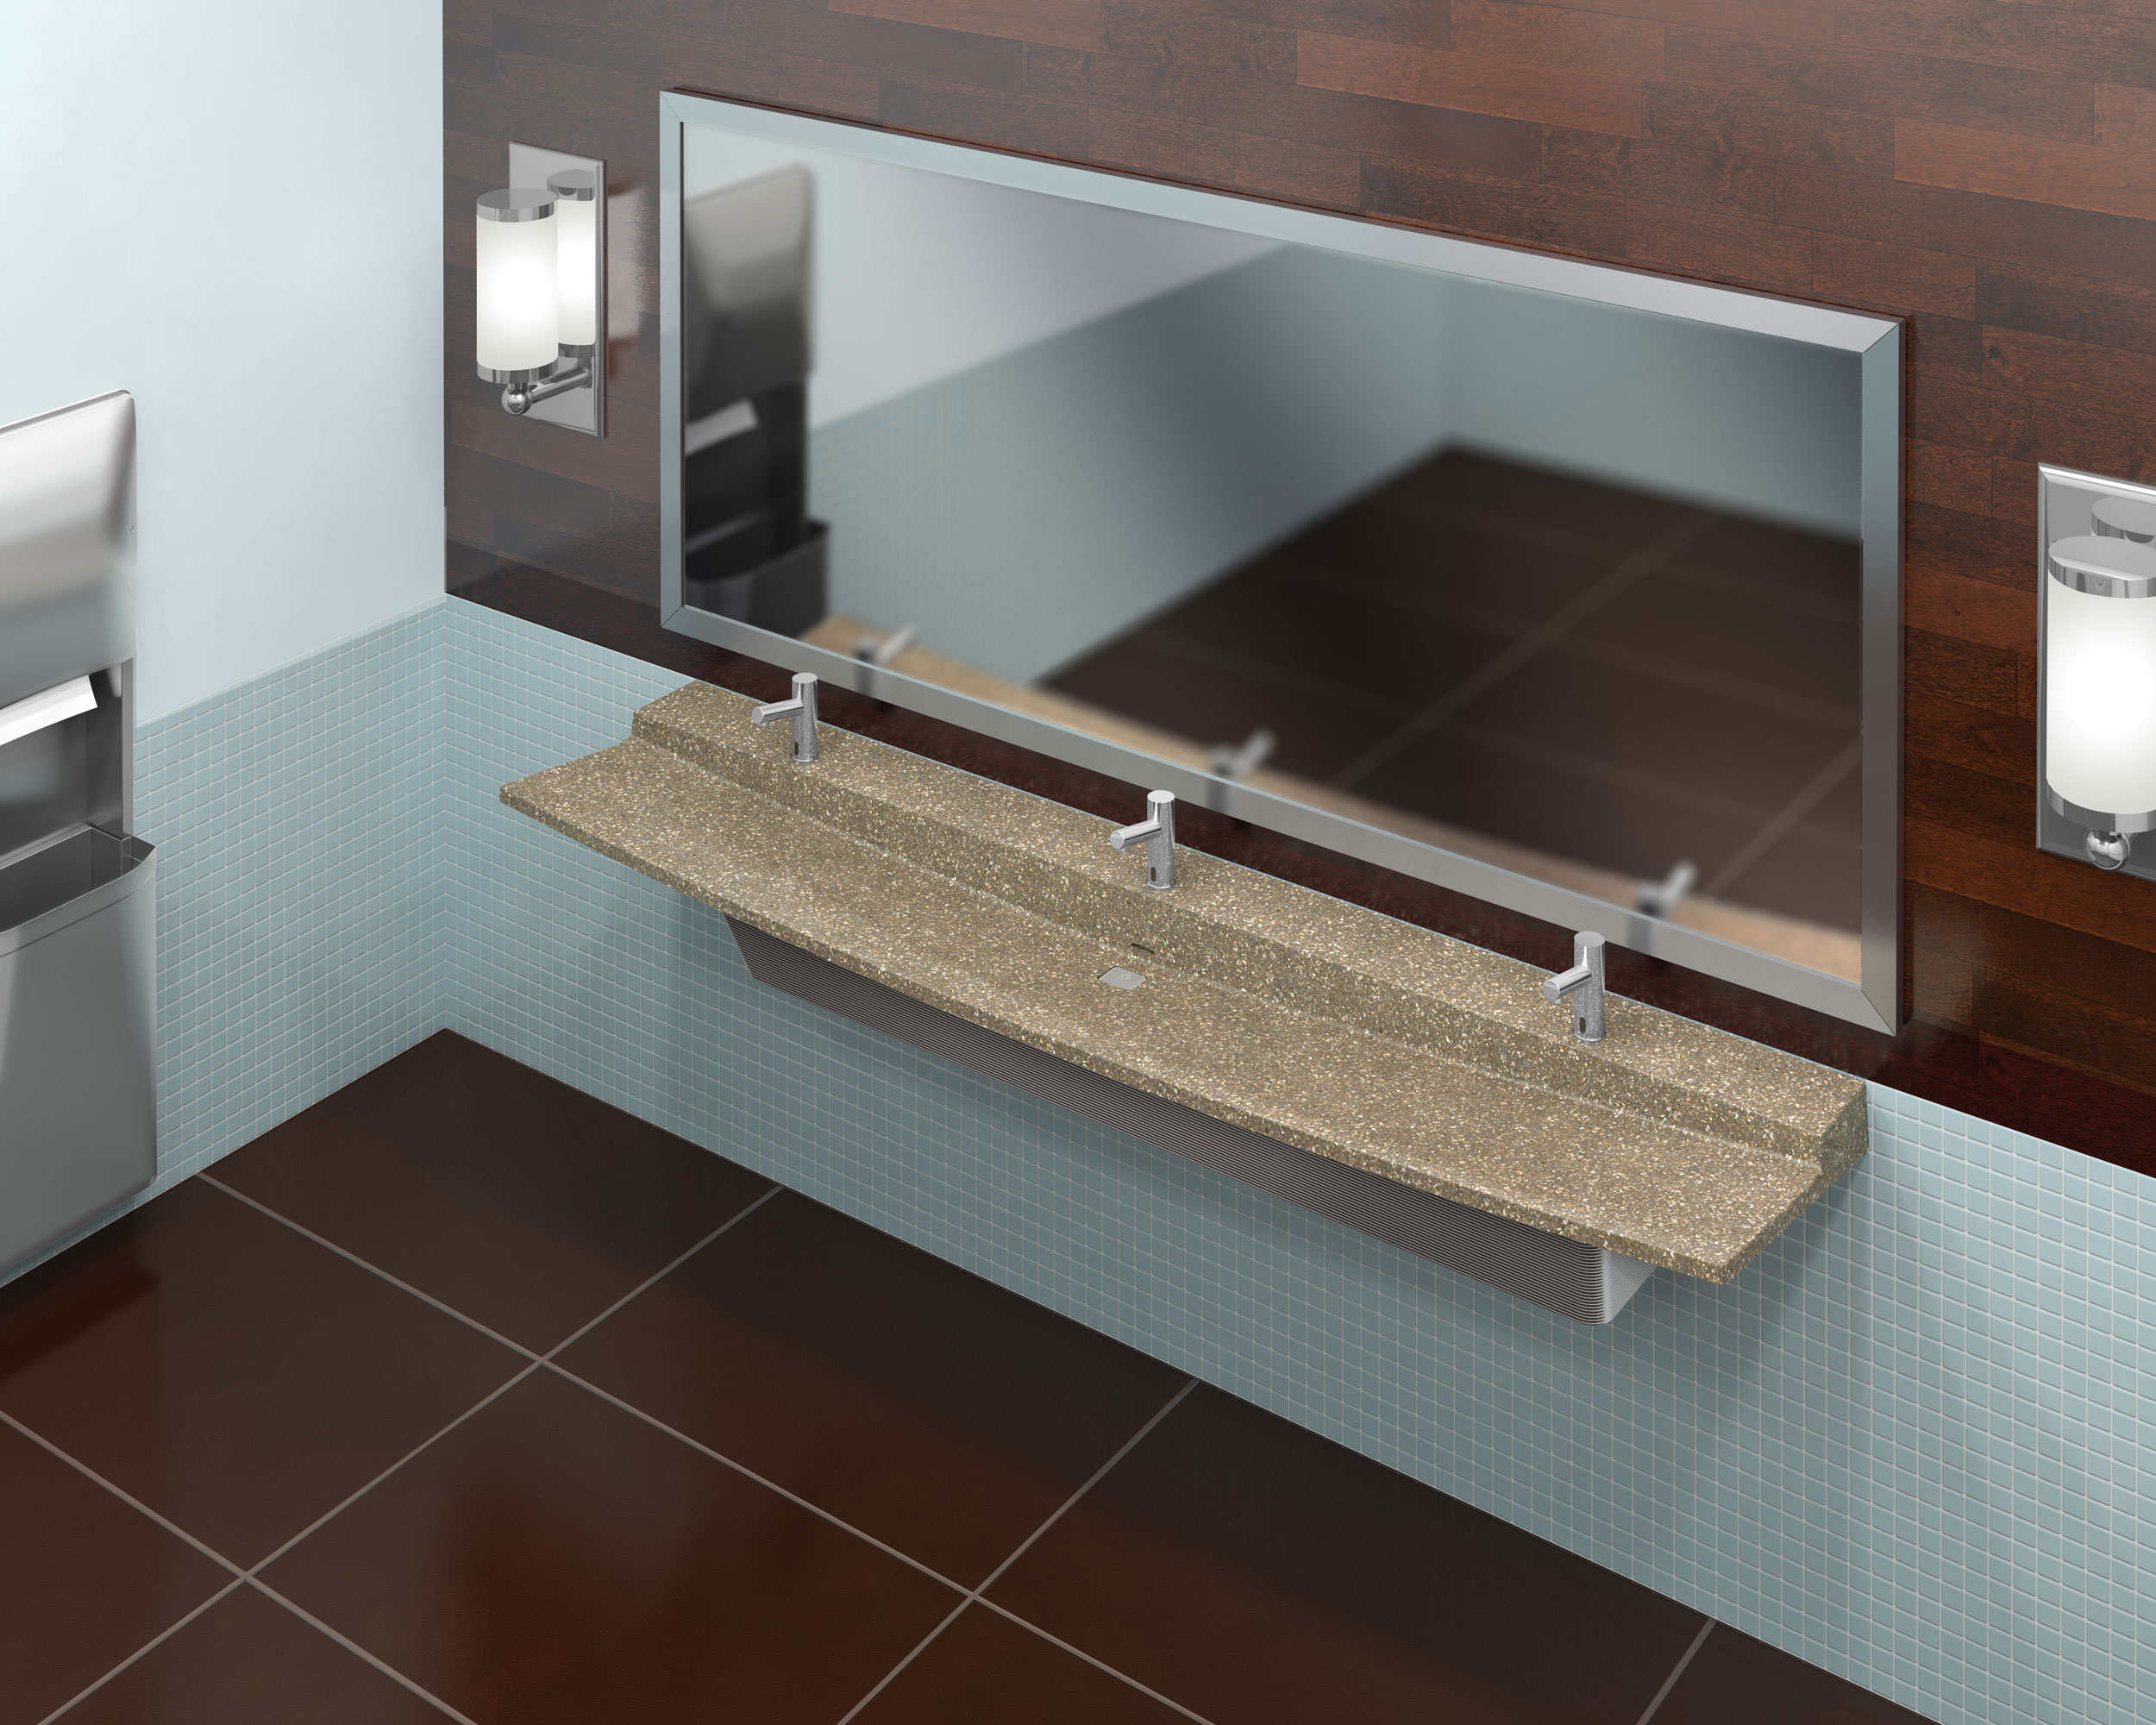 Wood and tile restroom featuring a 3-station Verge L-Series lavatory systems made with Evero natural quartz surface